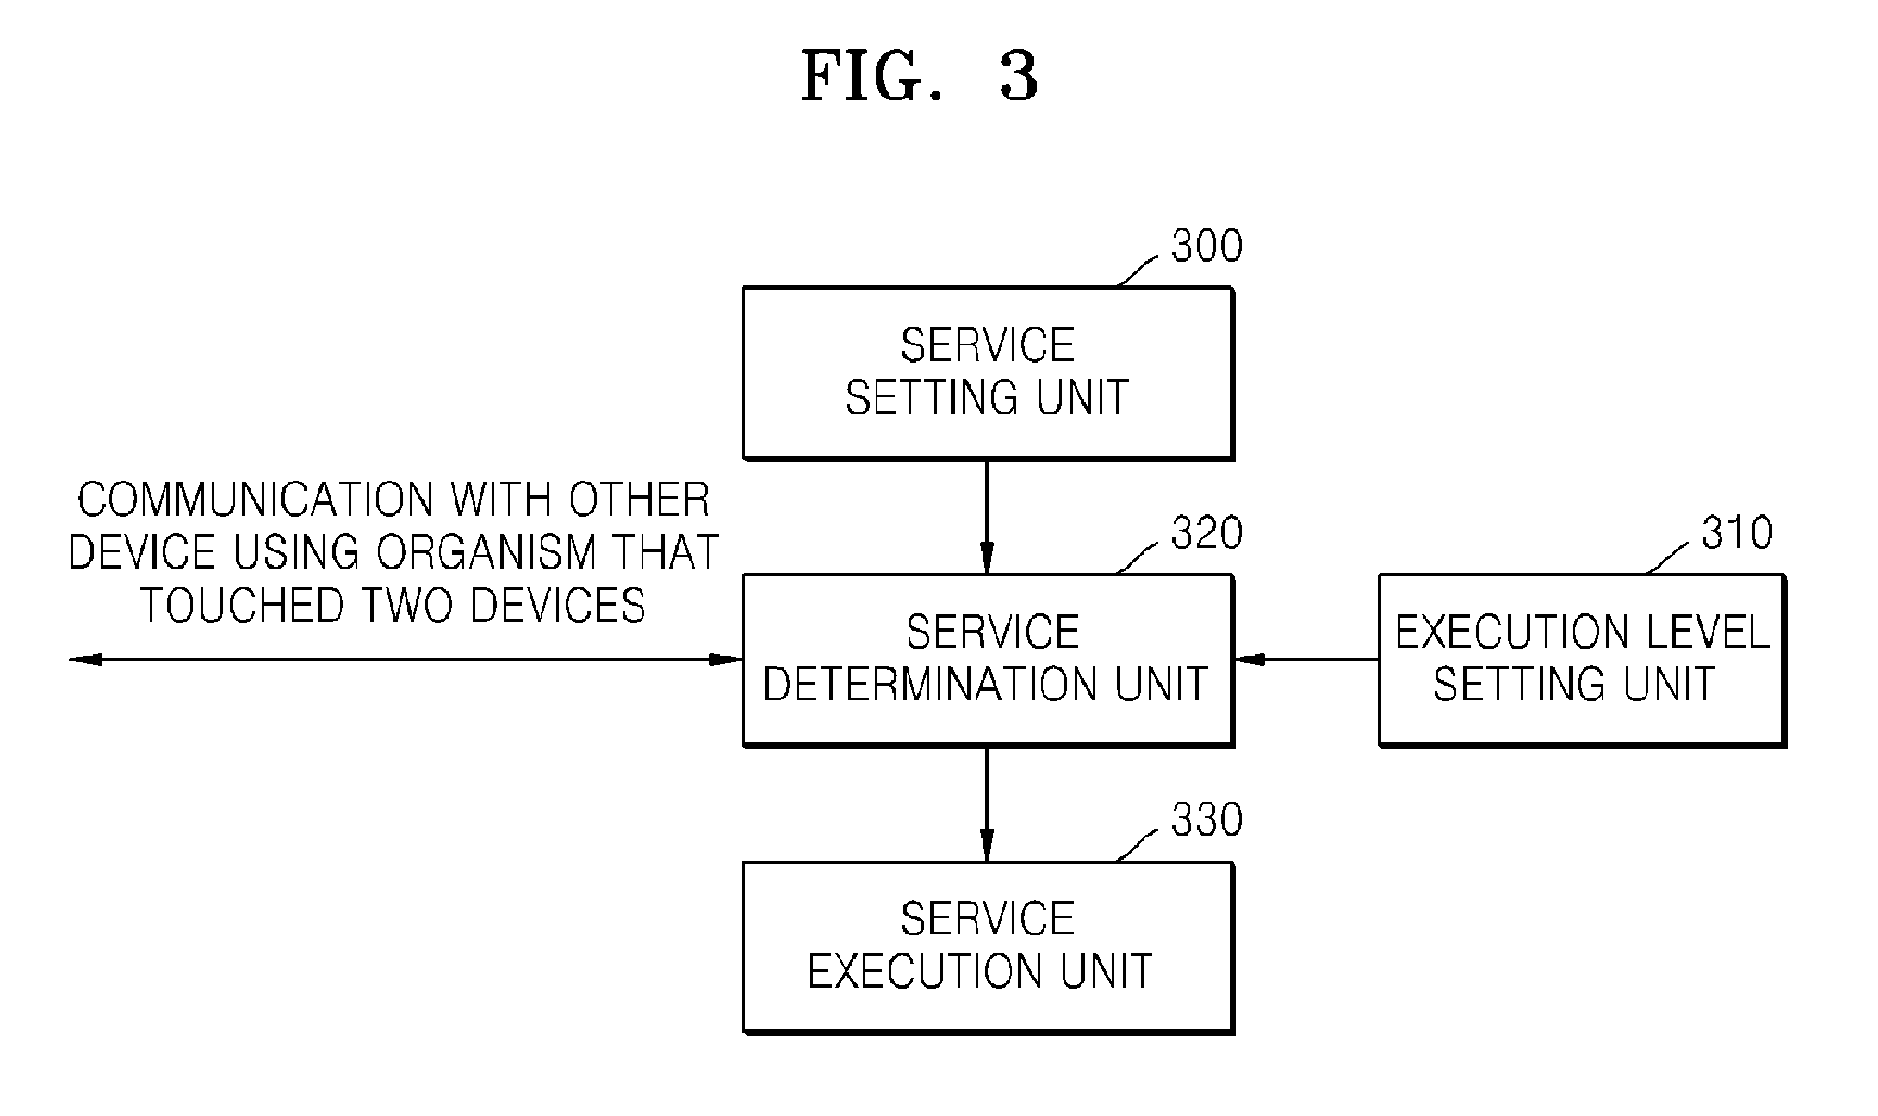 Method and Apparatus for Providing Touch and Play (Tap) - Based Service and System Using the Method and Apparatus